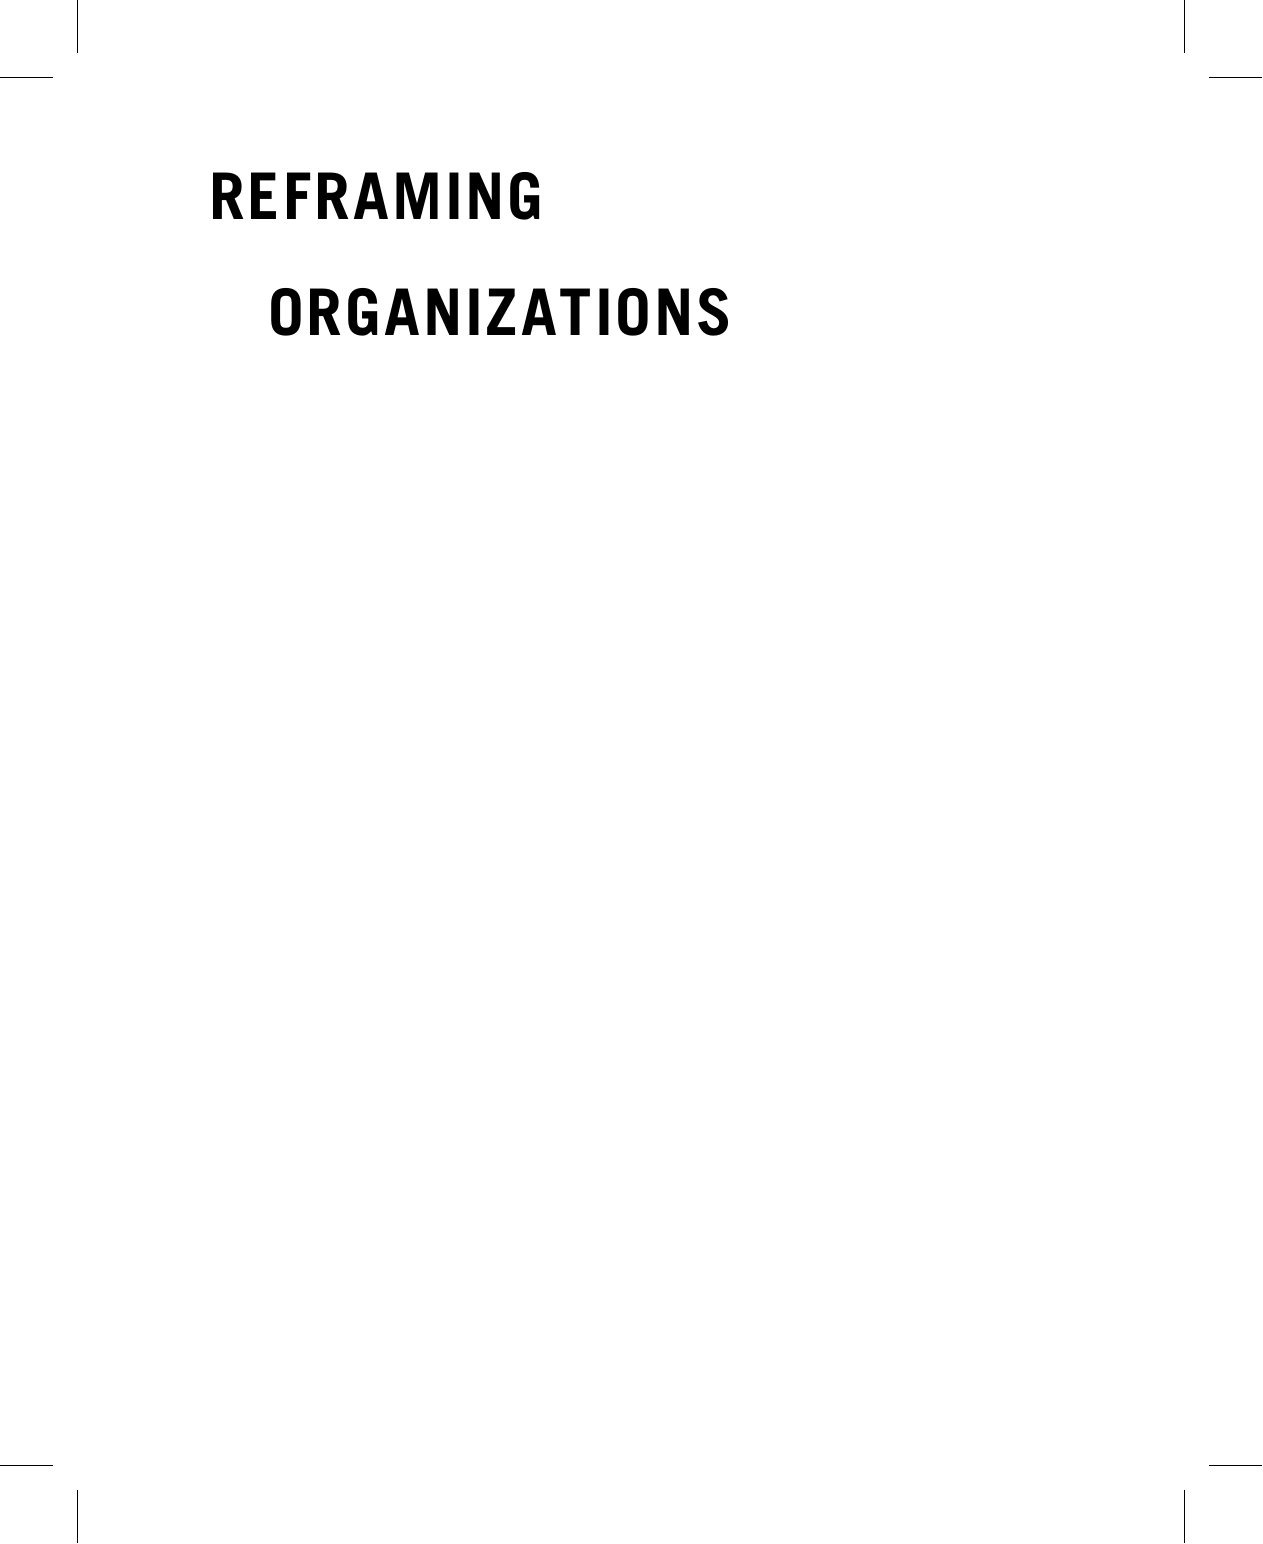 Reframing Organizations Artistry, Choice, and Leadership (6th edition) by Lee G